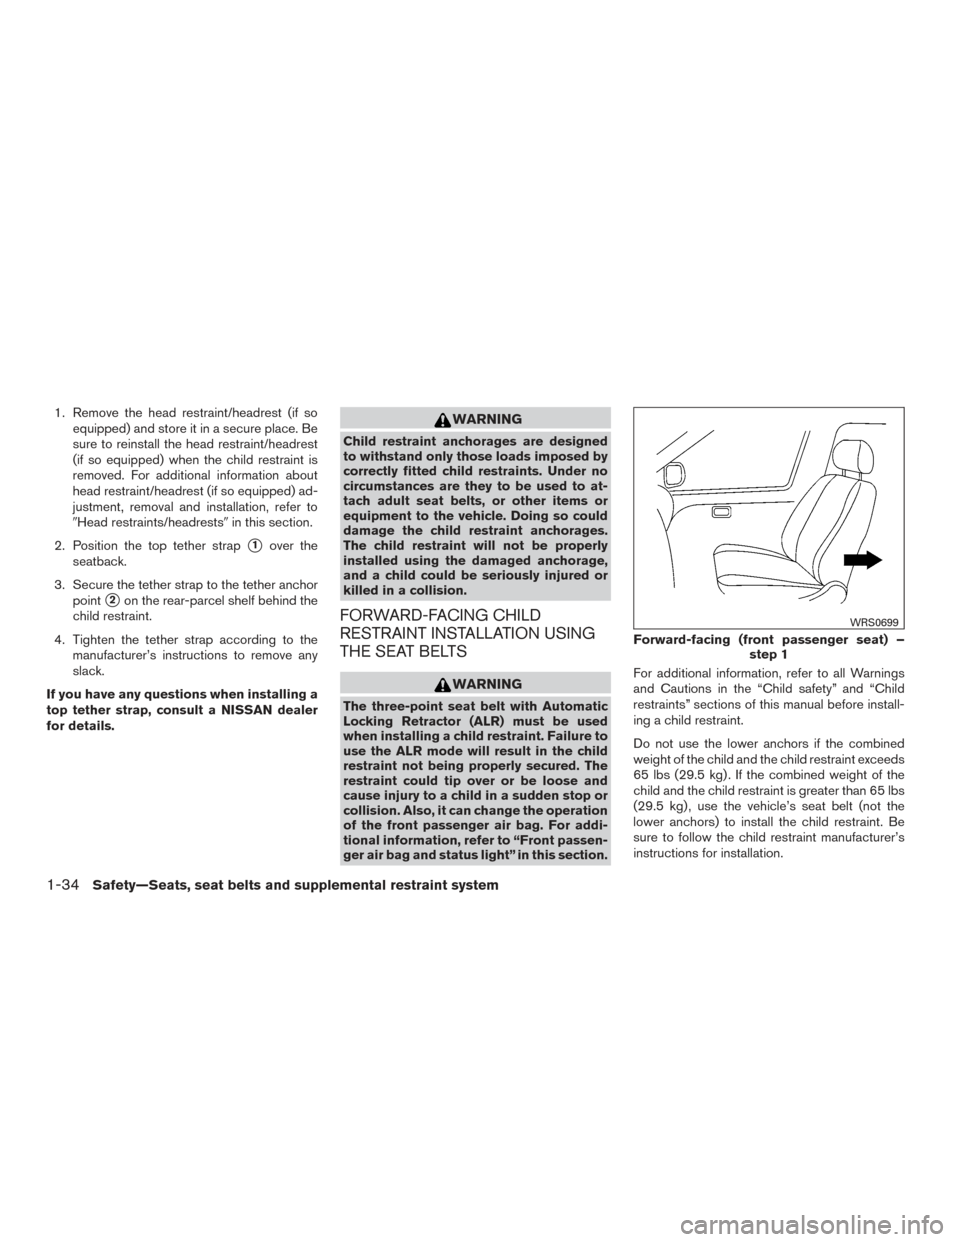 NISSAN ALTIMA 2016 L33 / 5.G Owners Manual 1. Remove the head restraint/headrest (if soequipped) and store it in a secure place. Be
sure to reinstall the head restraint/headrest
(if so equipped) when the child restraint is
removed. For additio